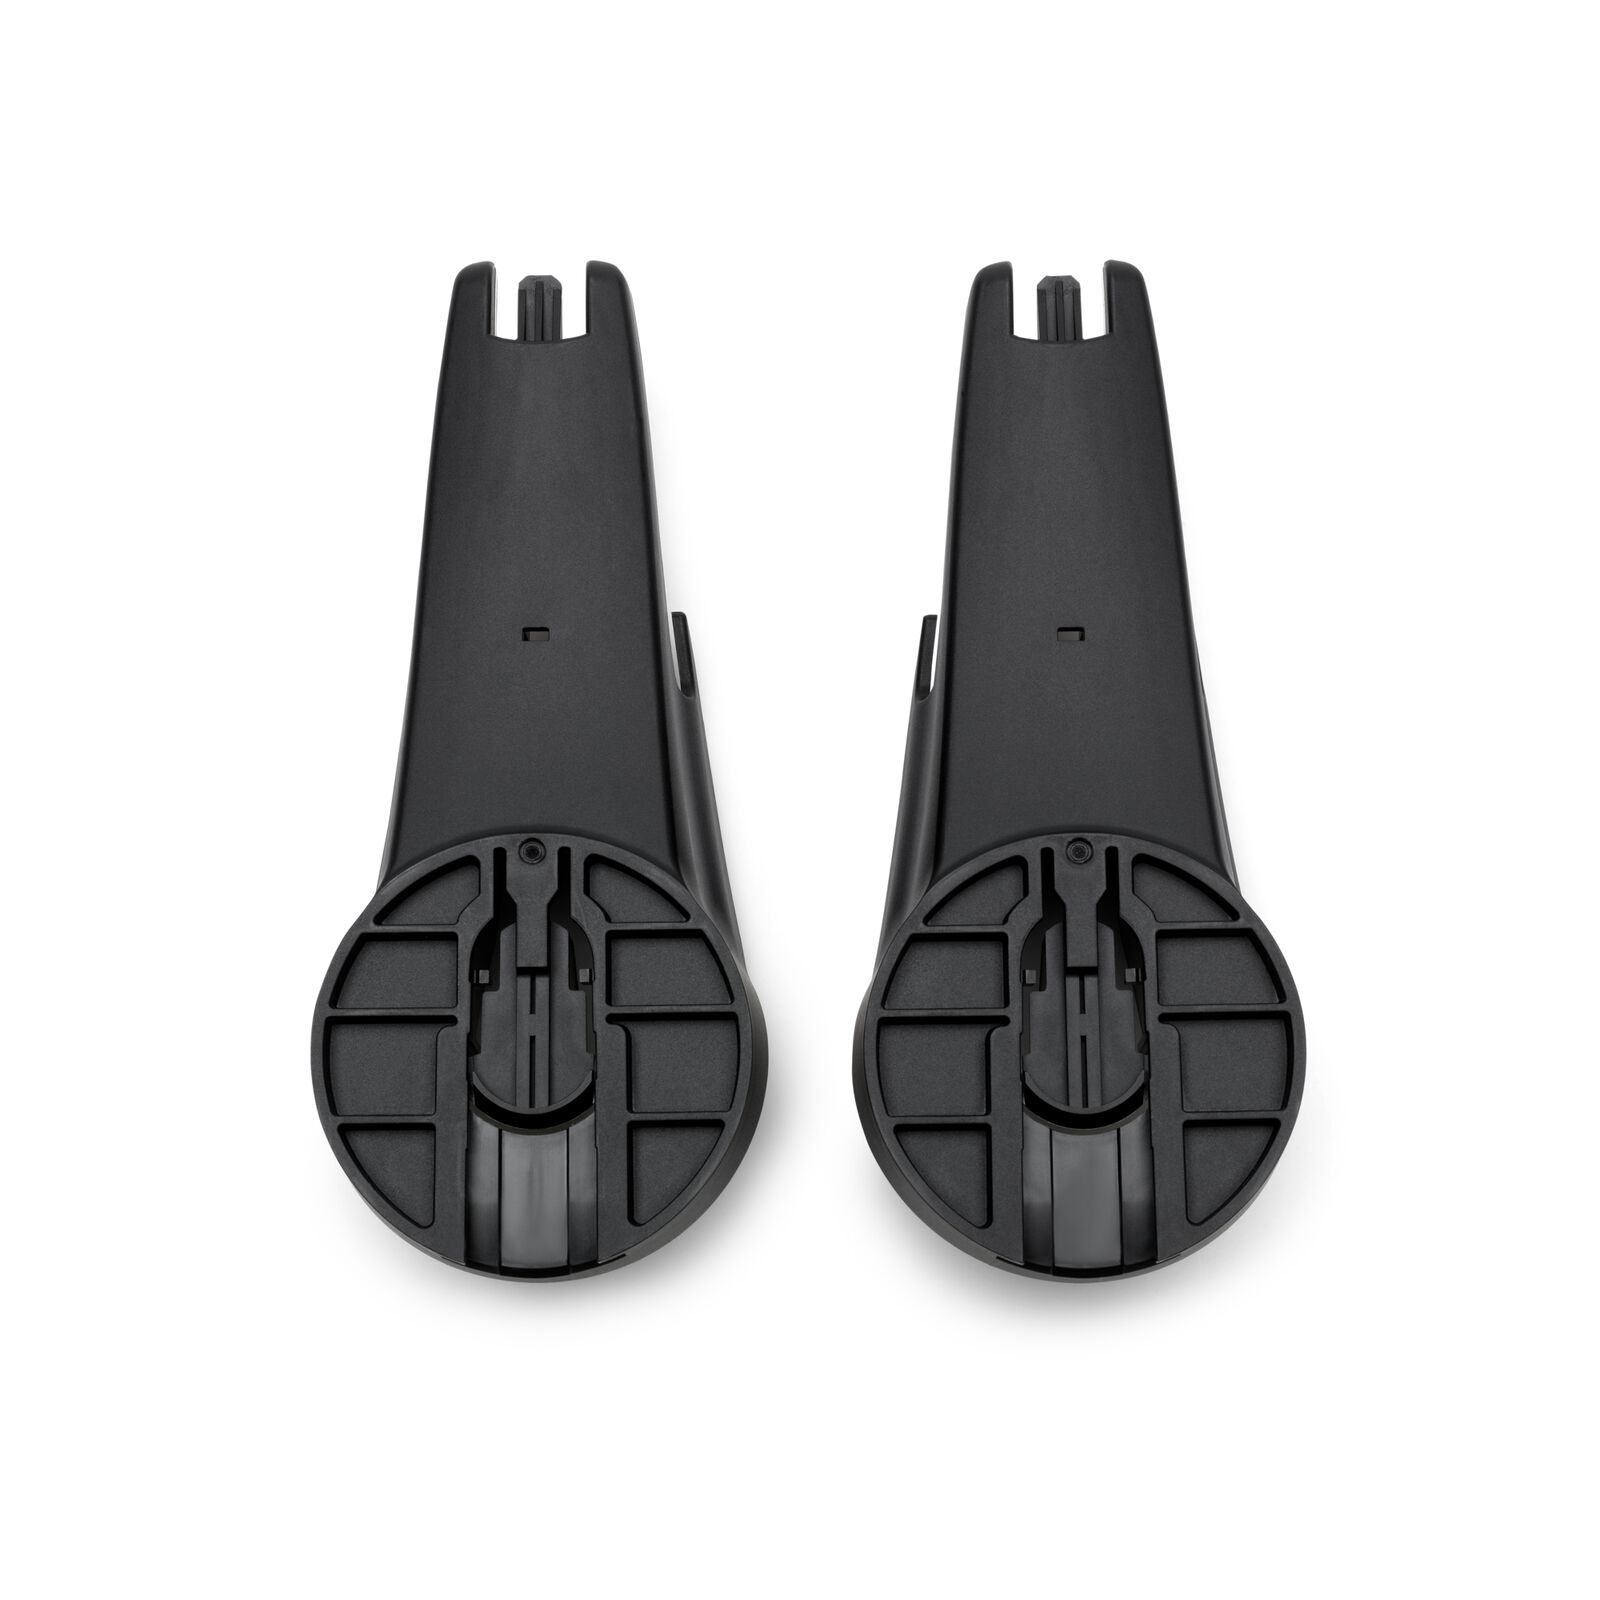 Bugaboo Bee 6 wiegadapters (2x) - View 1